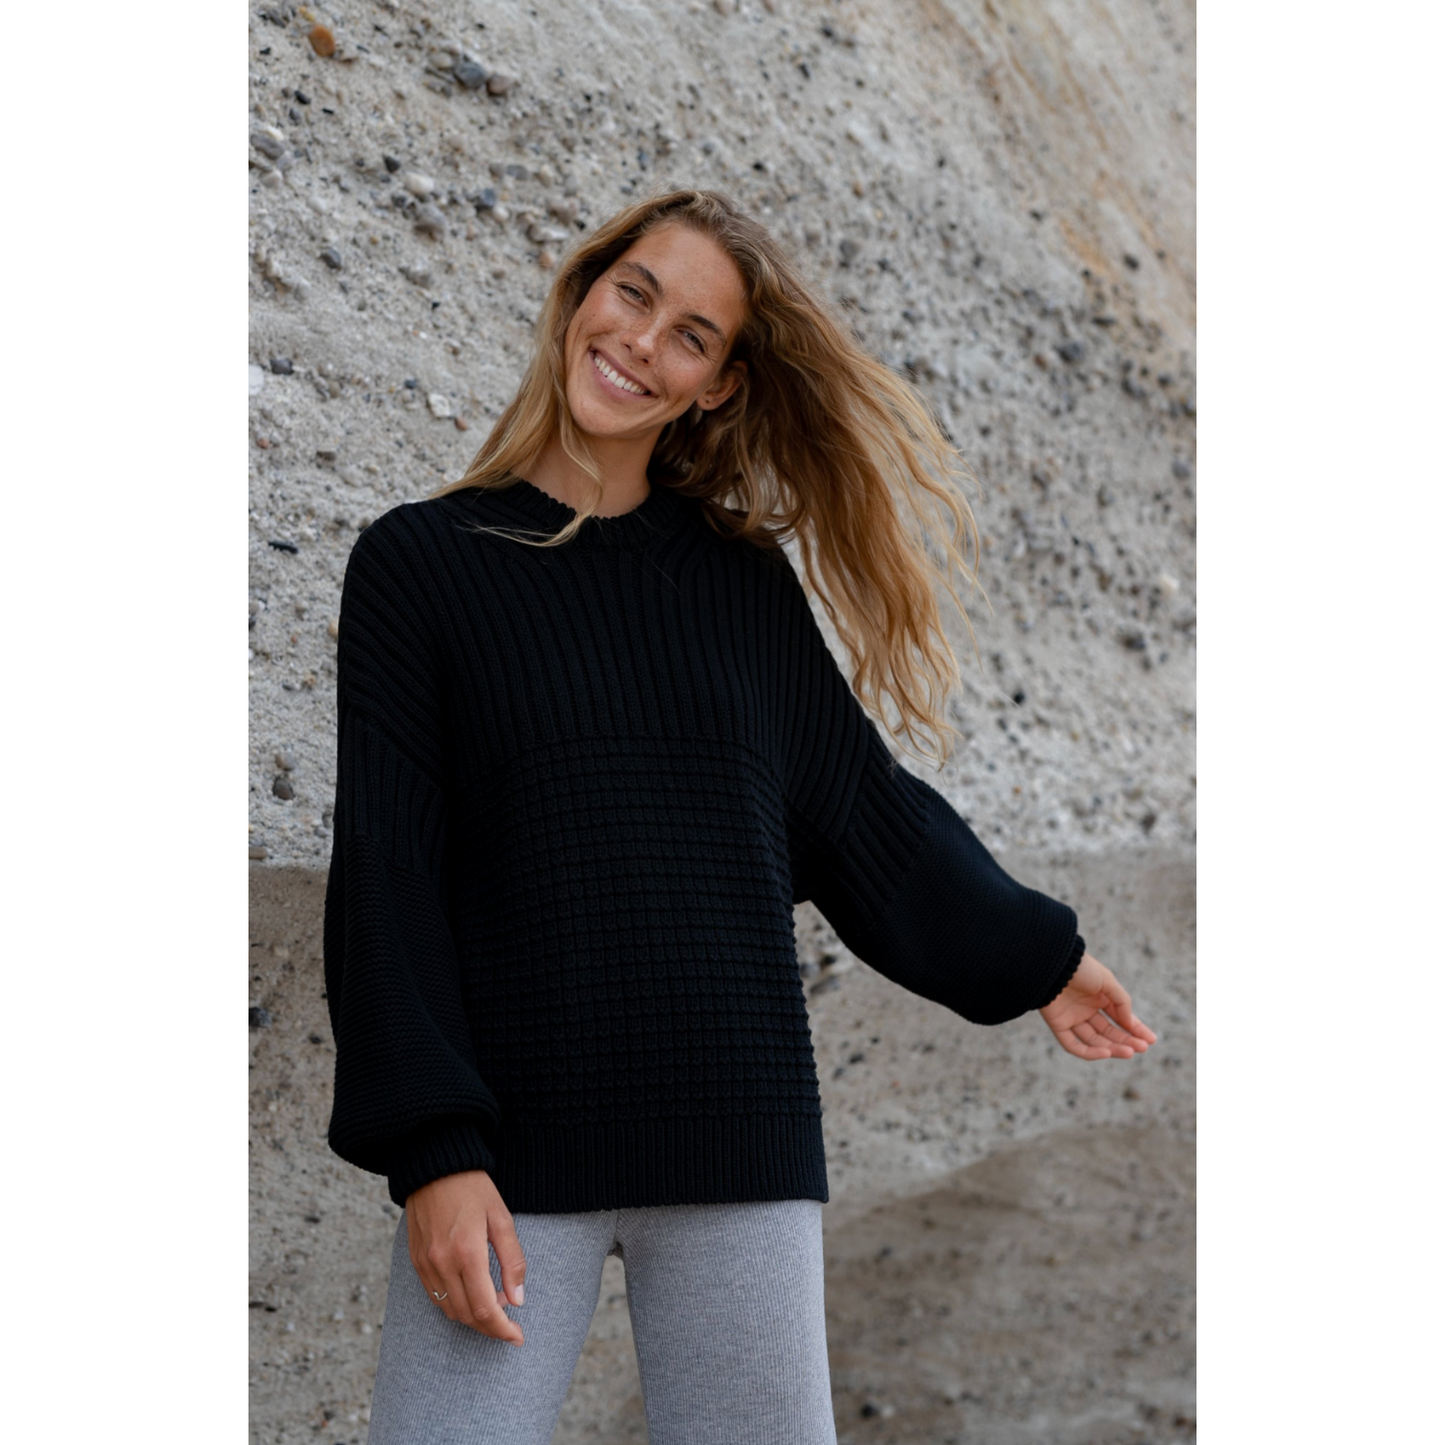 Delcia Sweater- Black - The Knotty Ones - ONE SIZE